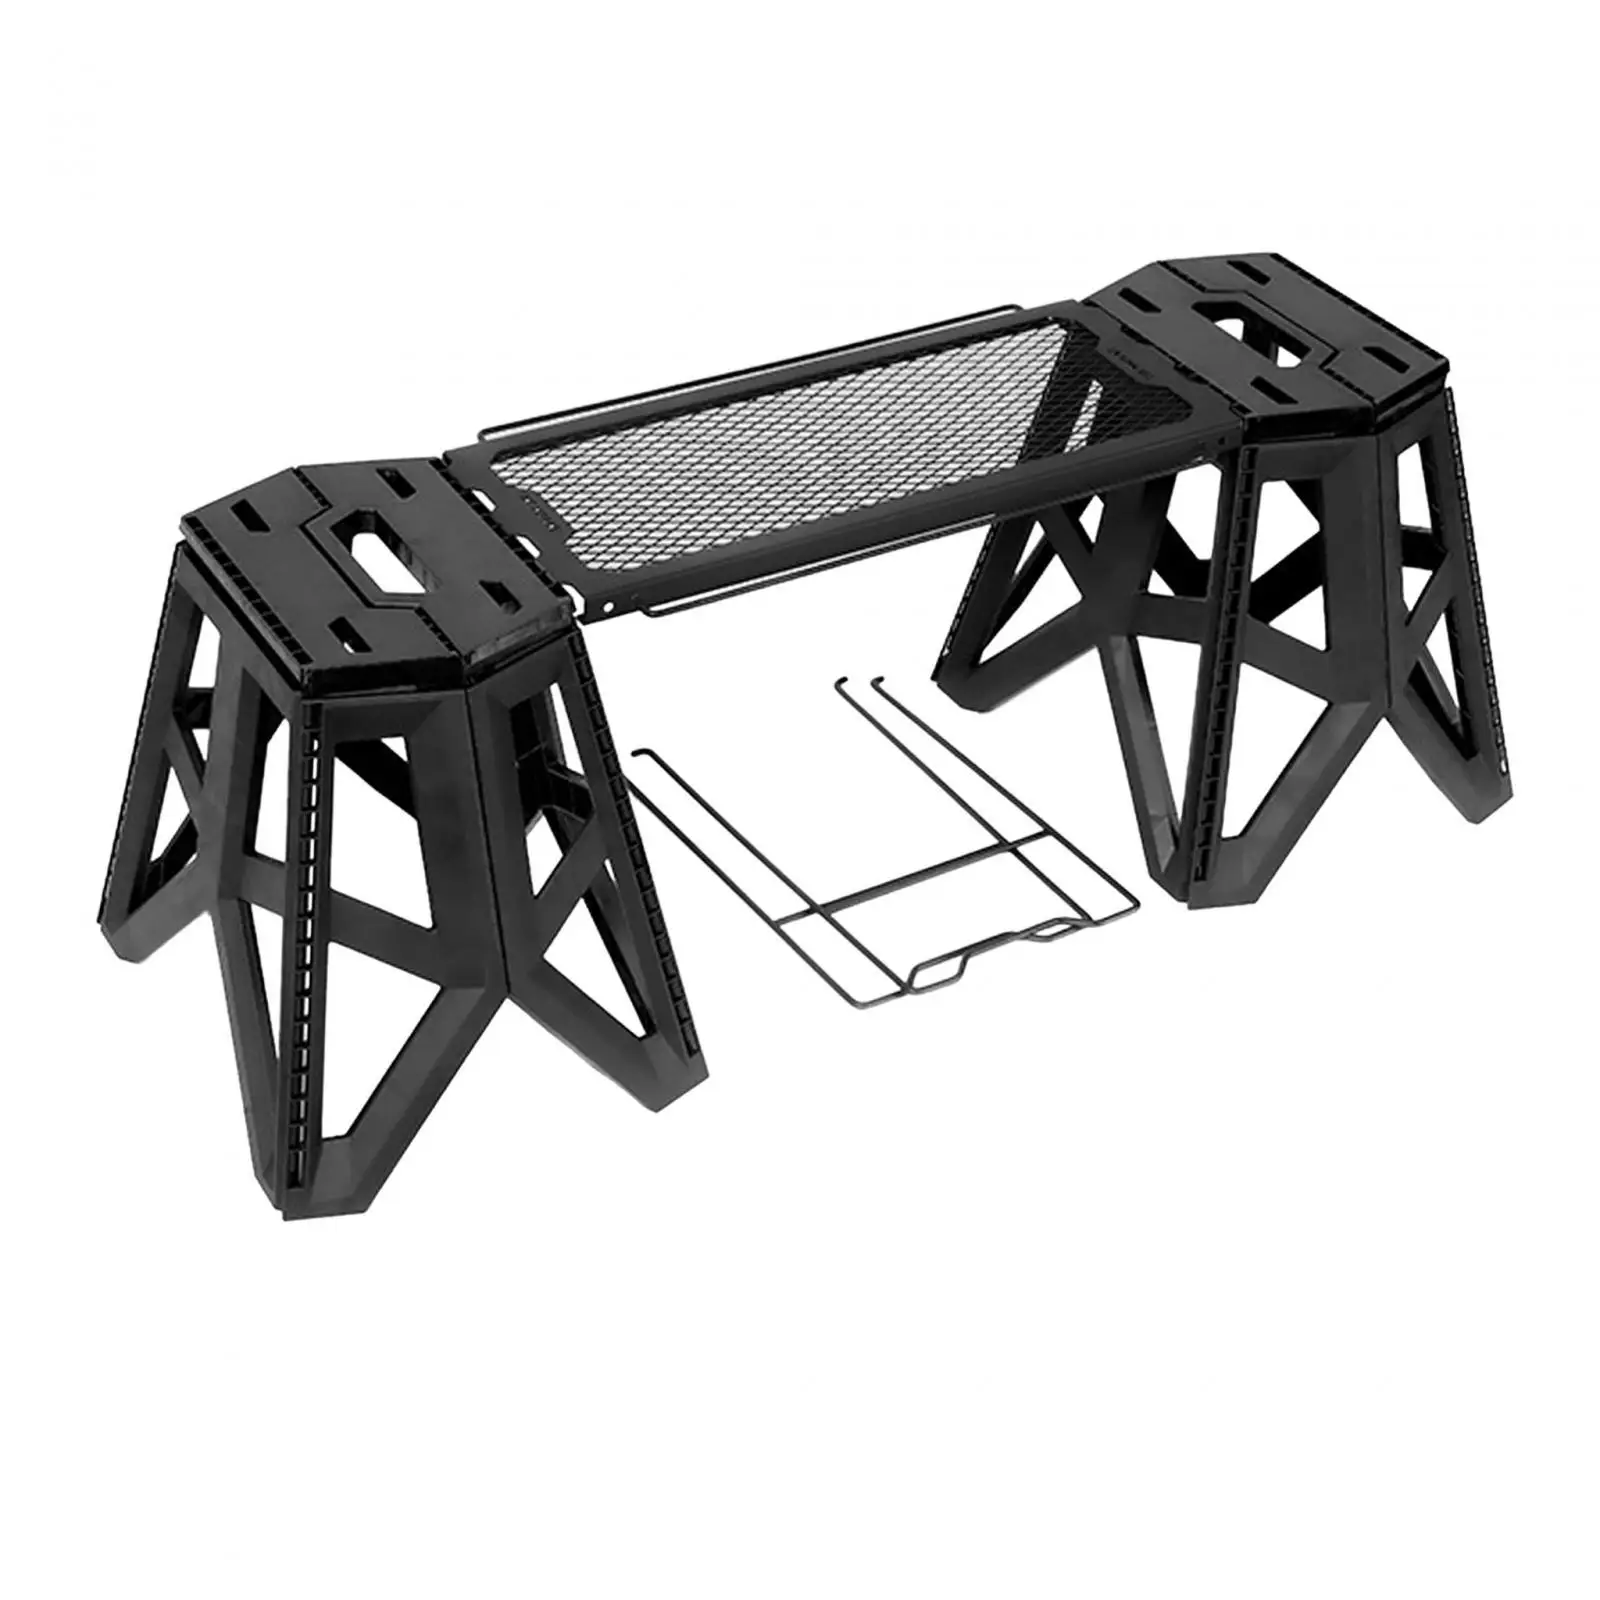 Camping Table and Stool Set, Folding Table Small Storage Rack, Collapsible Stool, Folding Stool Adults for Picnic Cooking